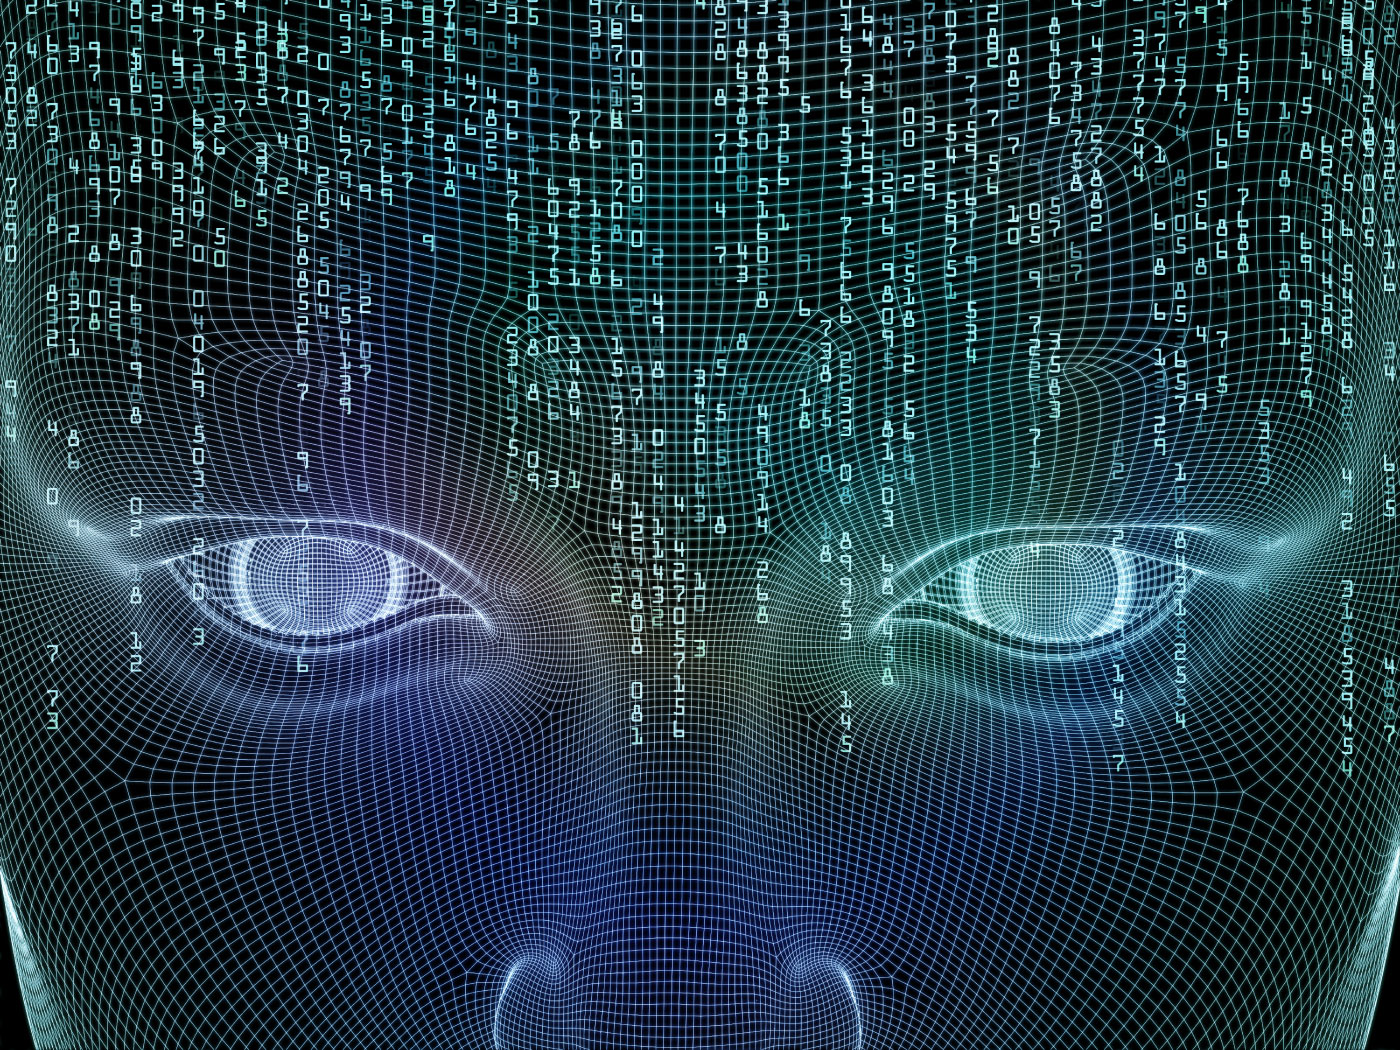 Artificial Intelligence involves using computers to perform tasks normally requiring human intelligence, such as taking decisions or recognizing text, speech or visual images.(Image Credit: Future of Life Institute)